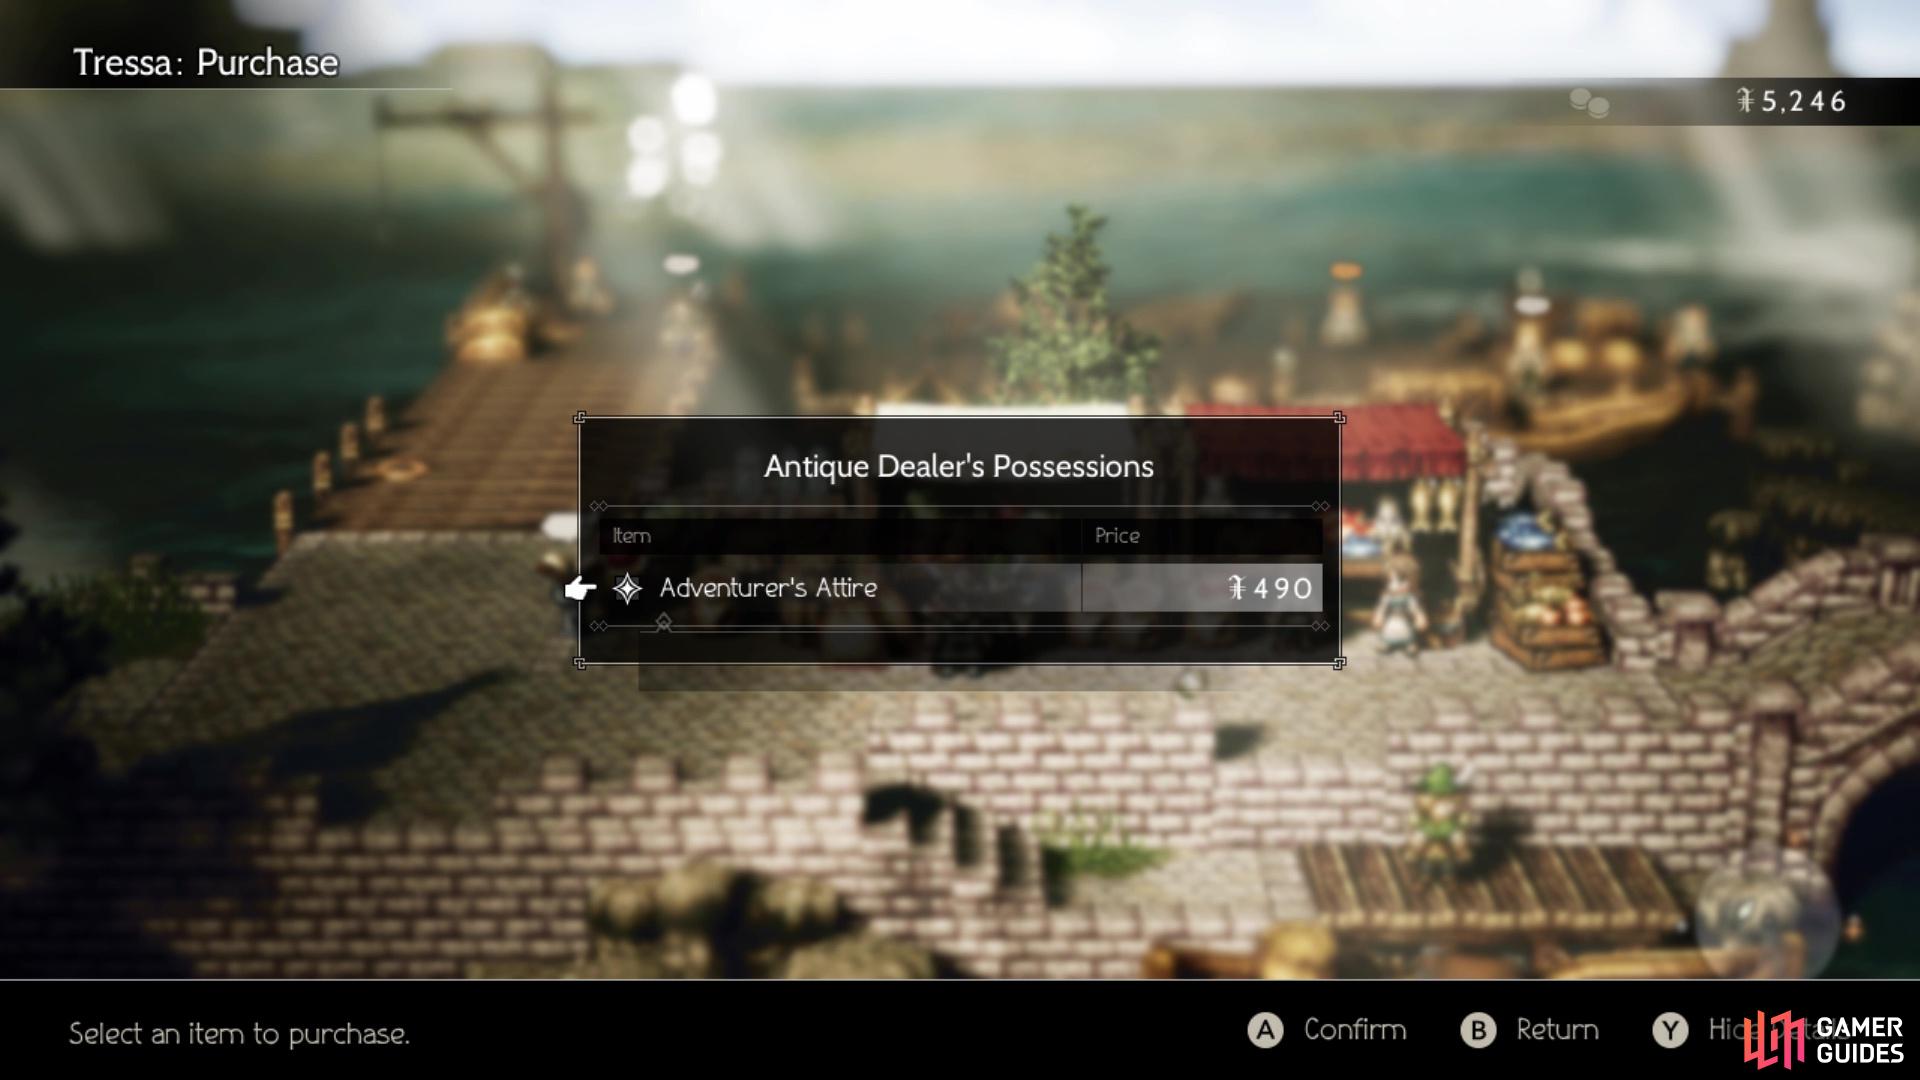 You can buy the Adventurer’s Attire from the Antique Dealer for Le Mann